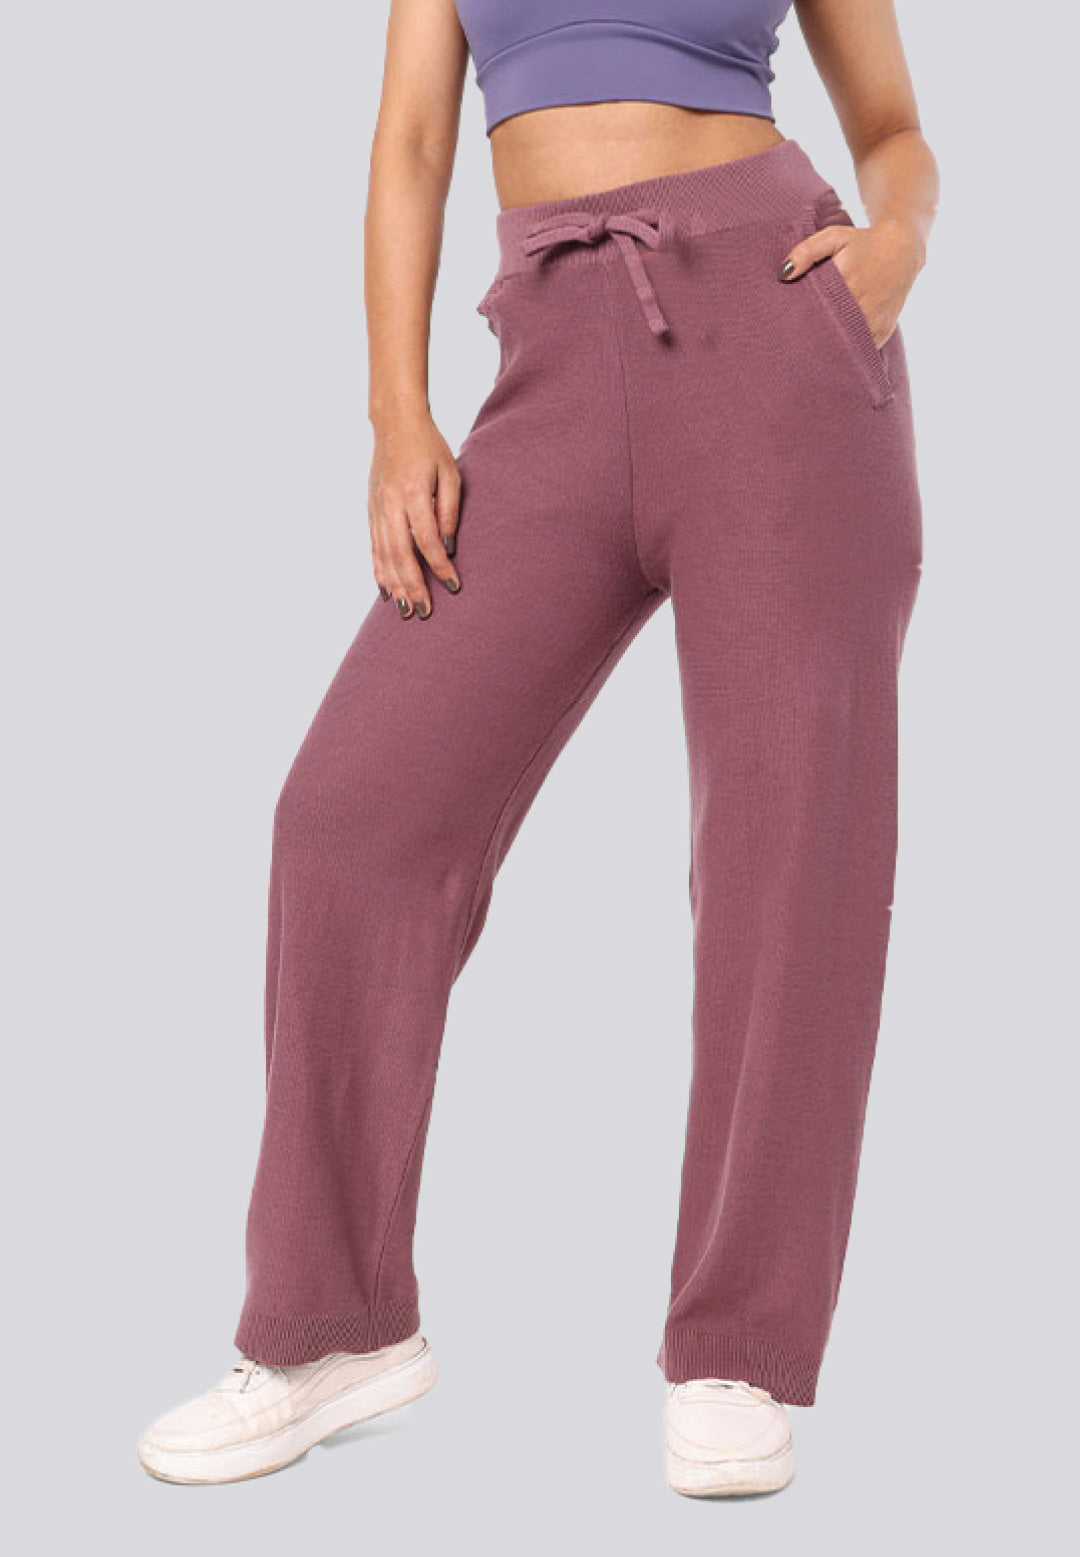 Comfy All Day Pants Tall